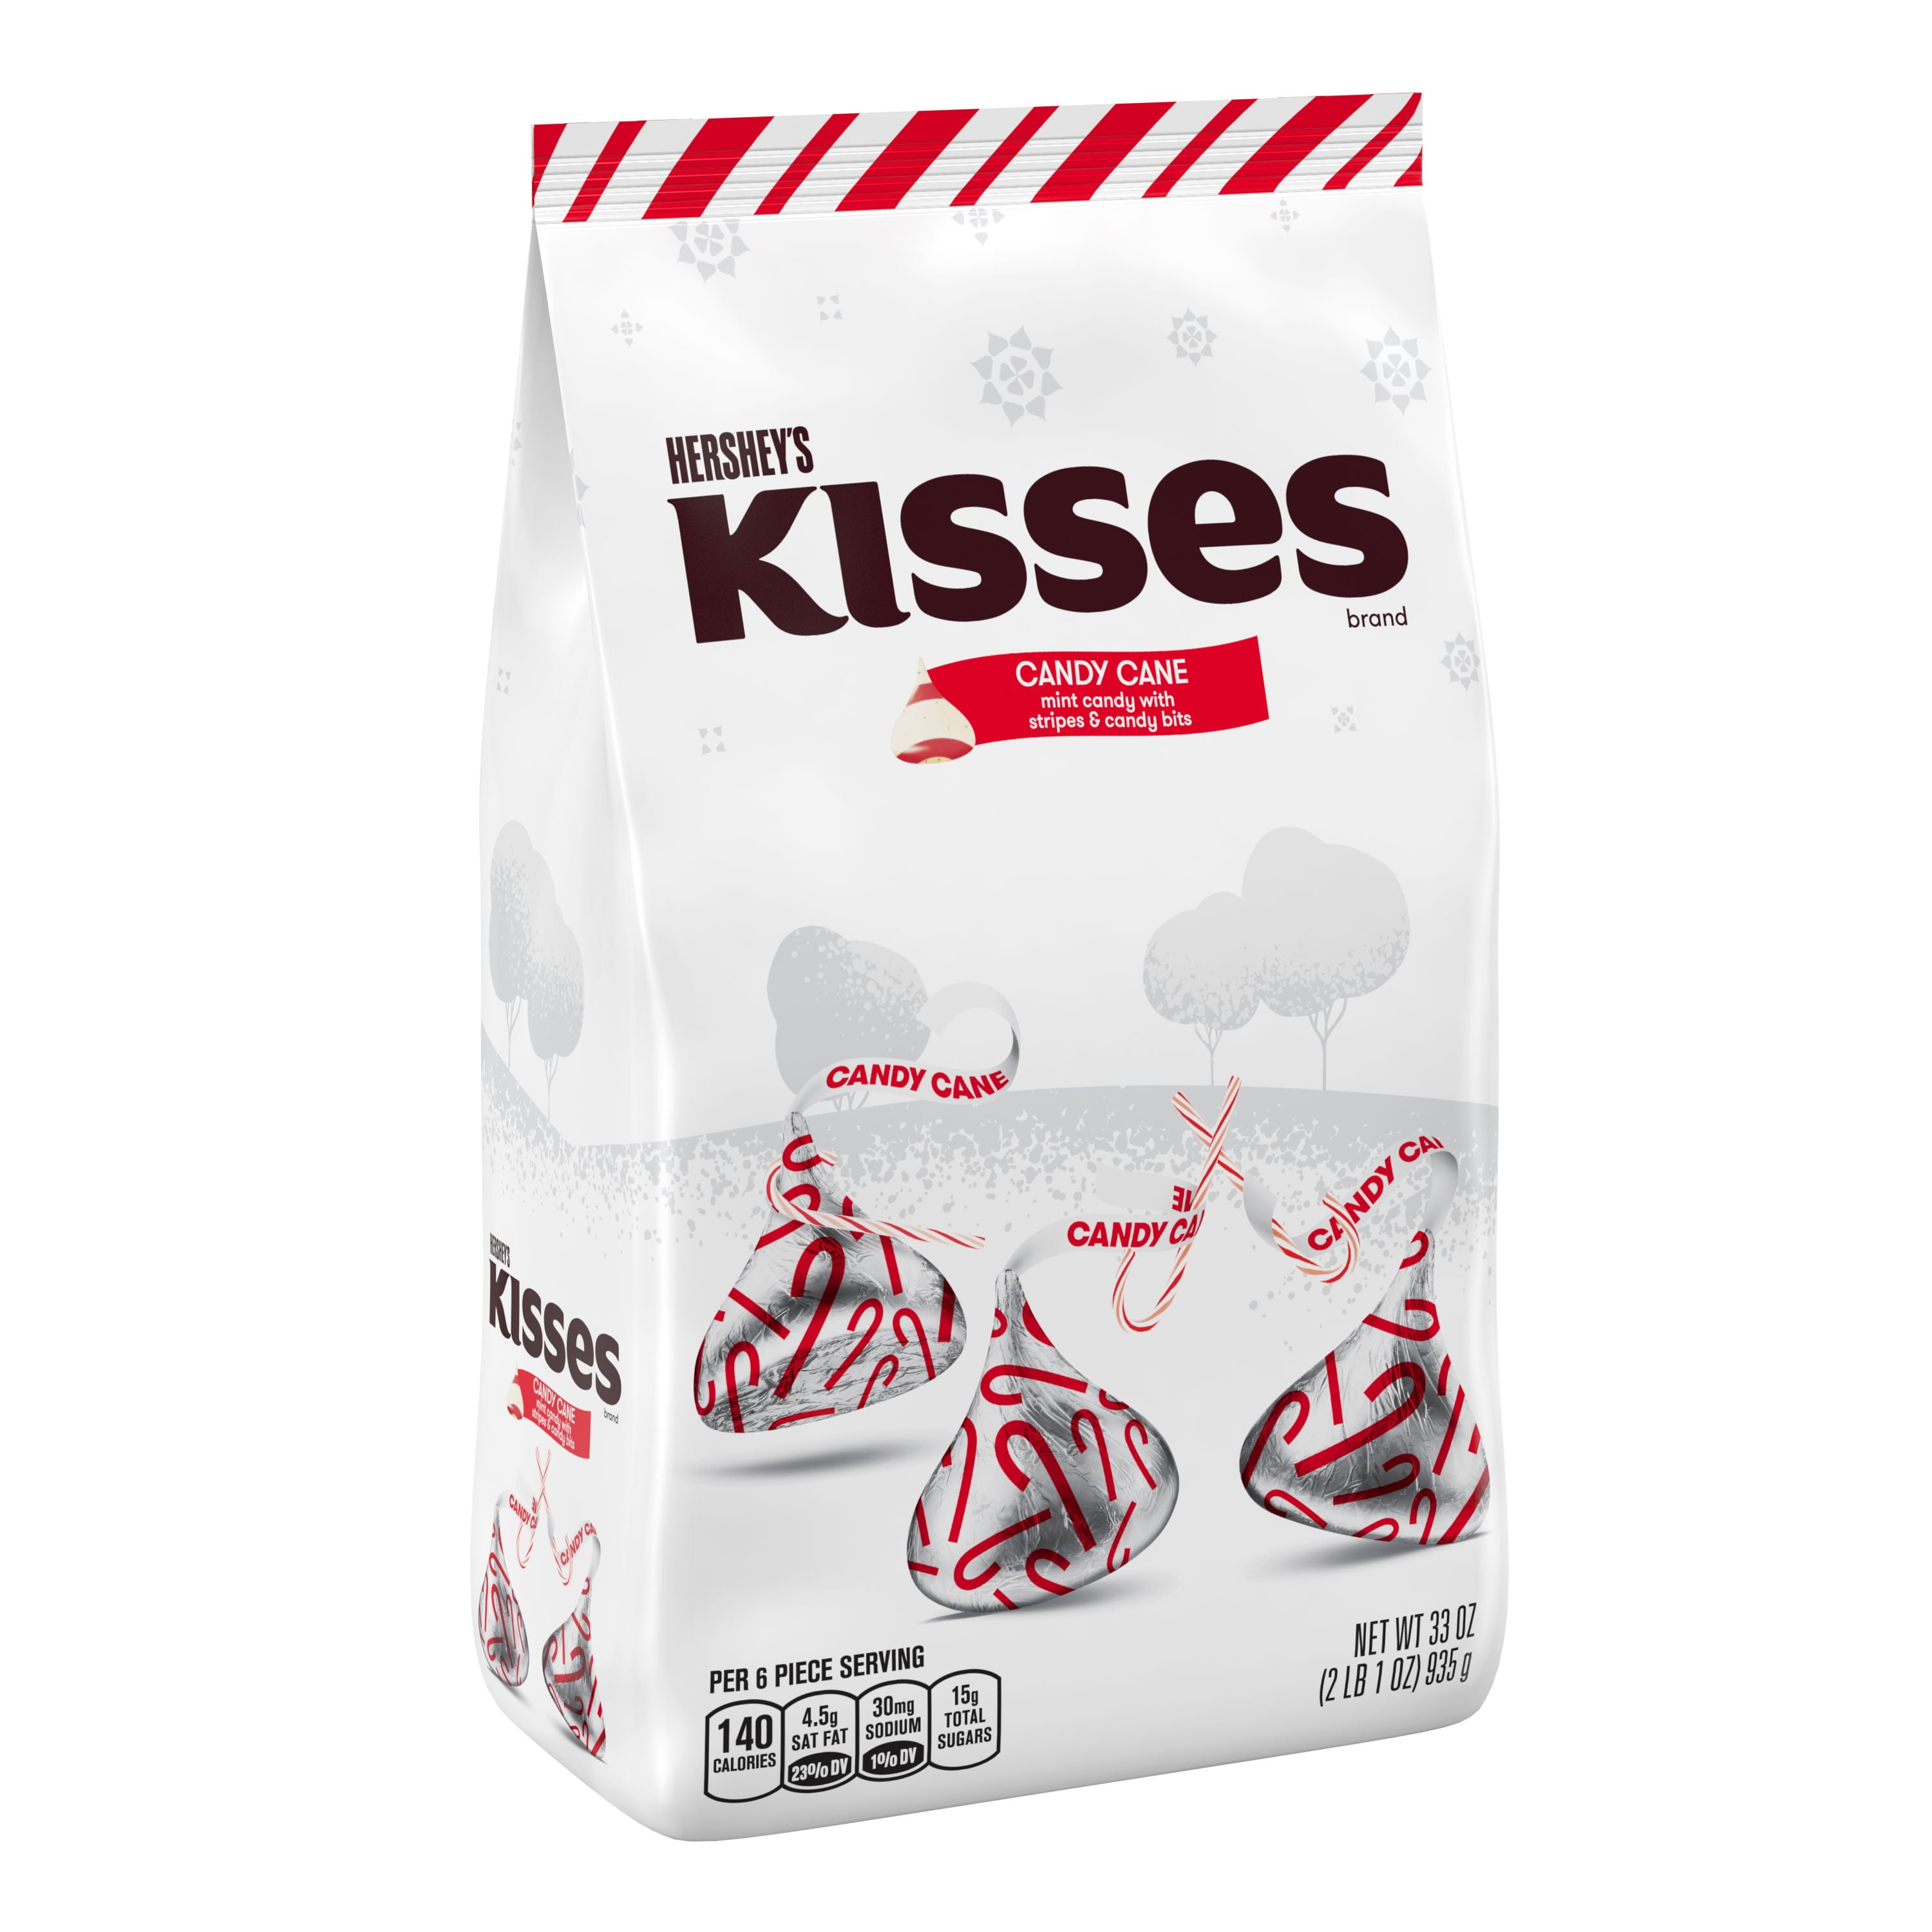 HERSHEY'S KISSES Candy Cane Flavored, Christmas , Candy Bag, 9 oz